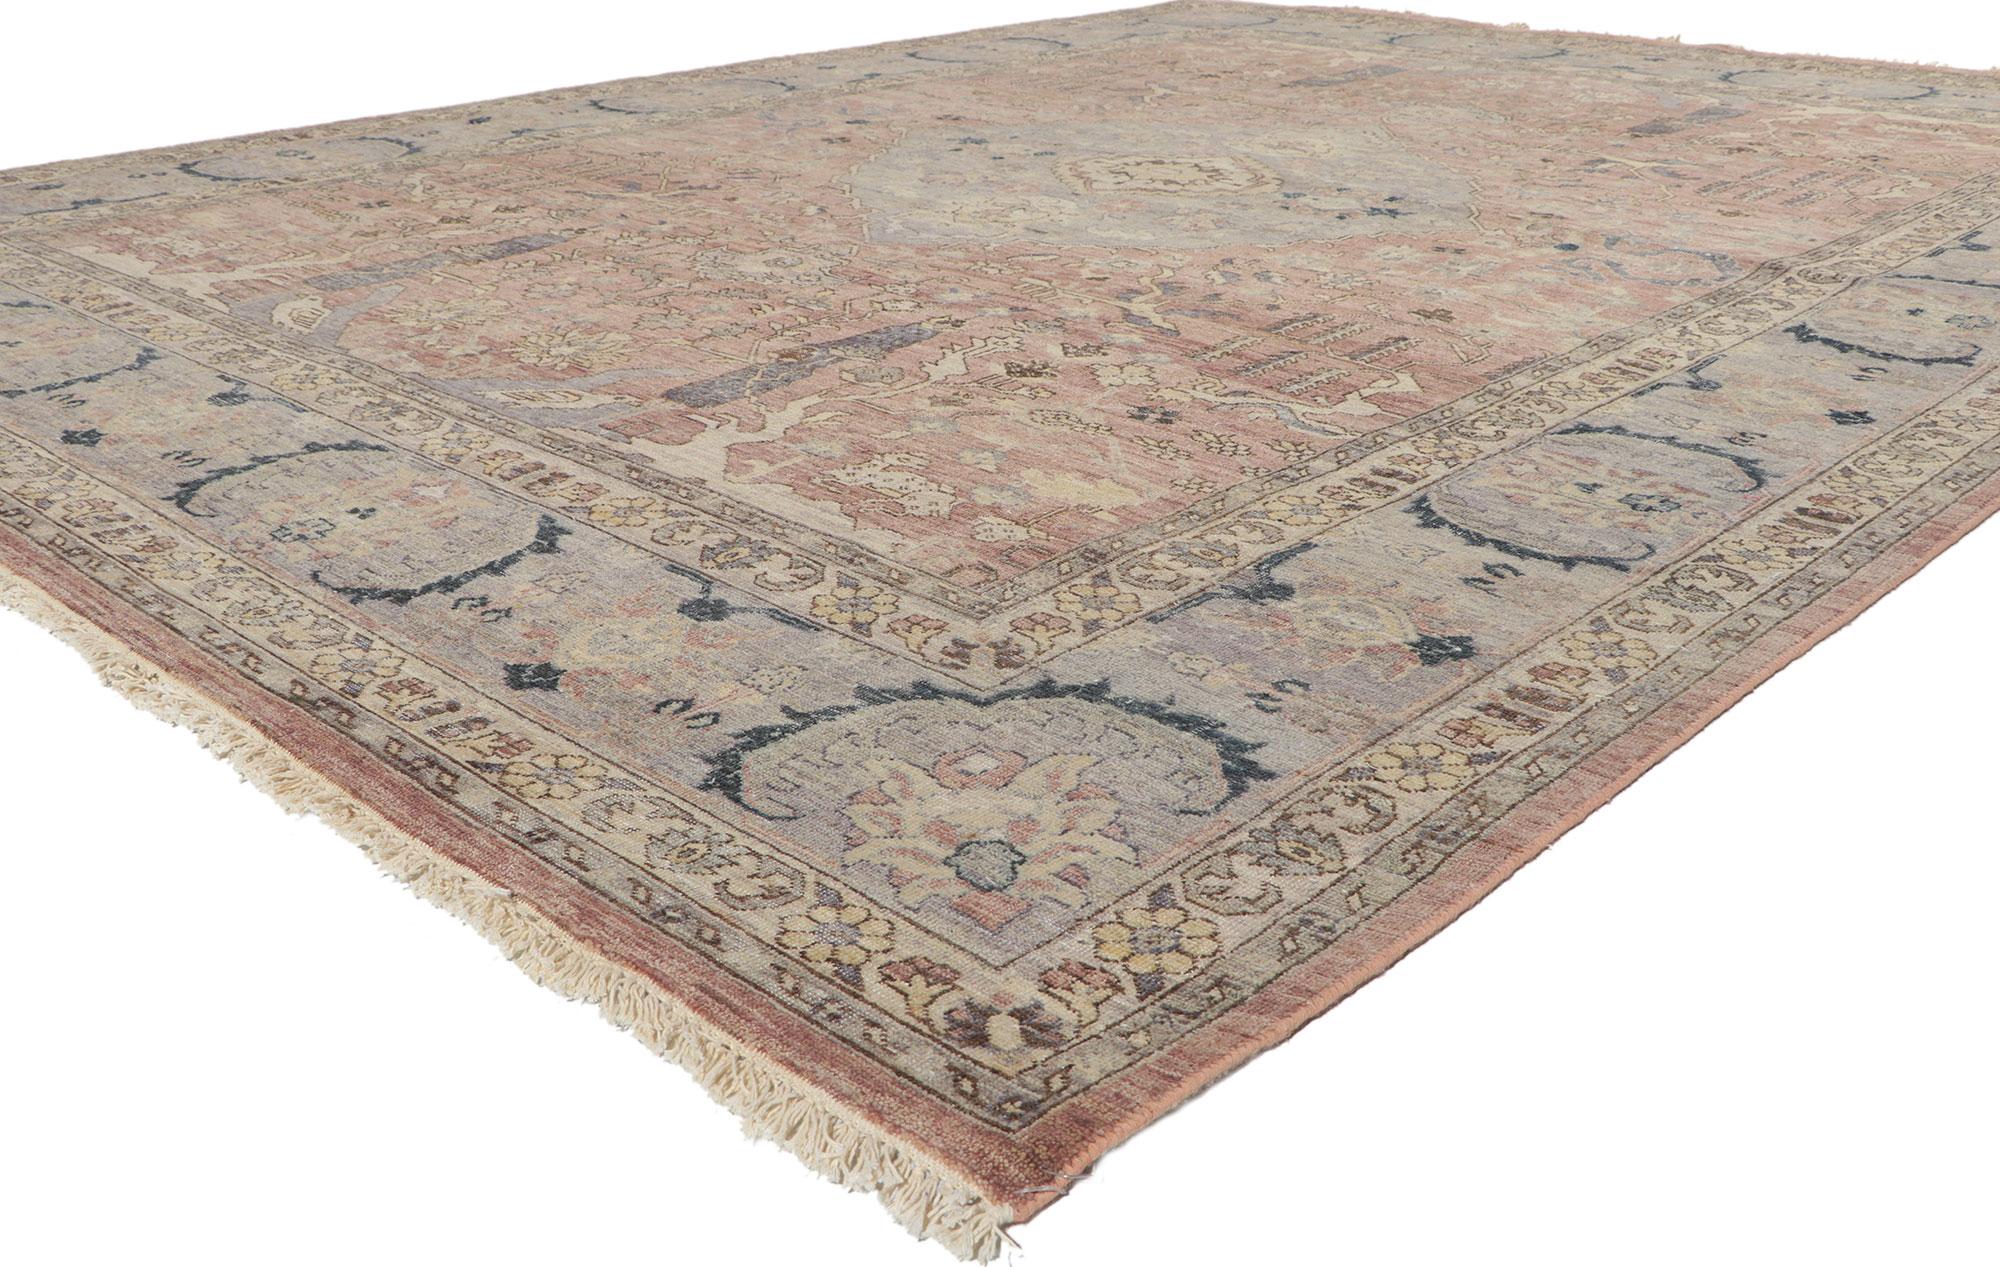 30777 New Modern Distressed rug with Vintage Style 09'00 x 11'10. With its neutral colors and weathered beauty combined with nostalgic charm, this new contemporary distressed rug creates an inimitable warmth and calming ambiance. The geometric